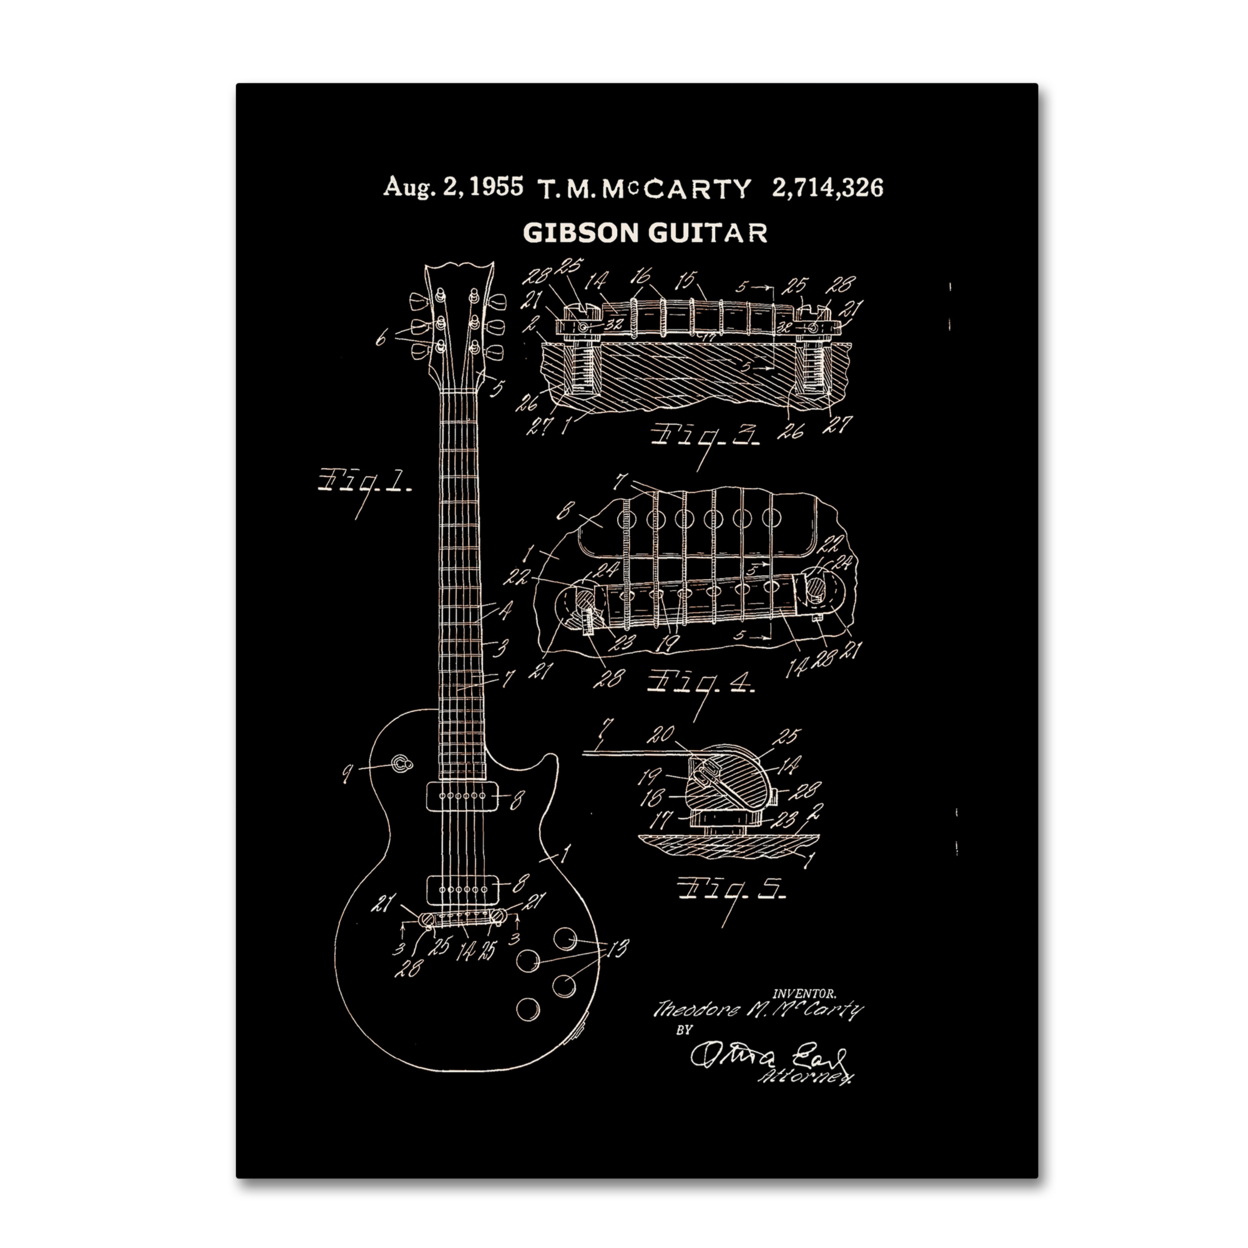 Claire Doherty '1955 Mccarty Gibson Guitar Patent Black' Canvas Wall Art 35 X 47 Inches